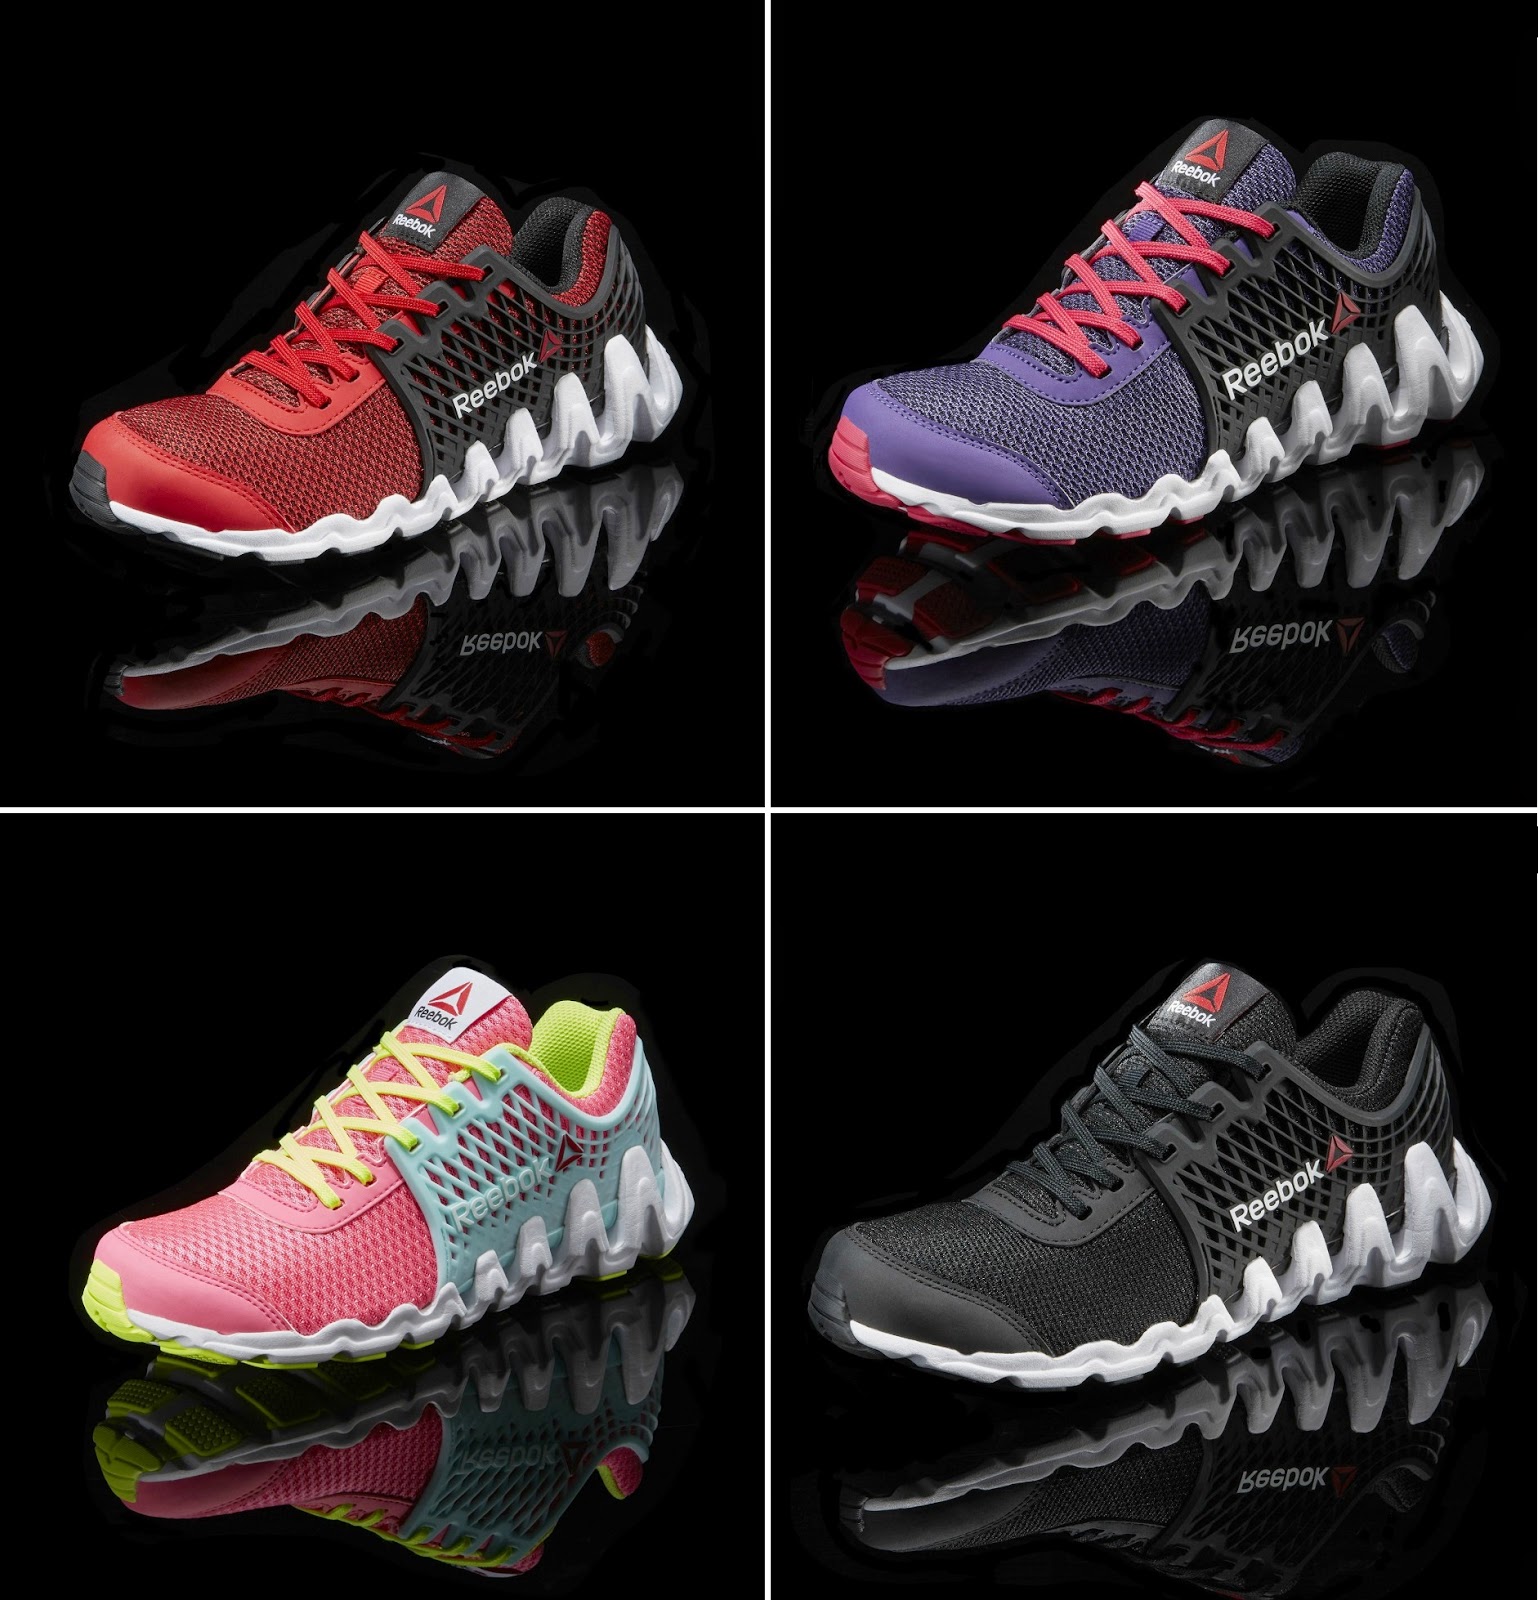 reebok shoes images 2015